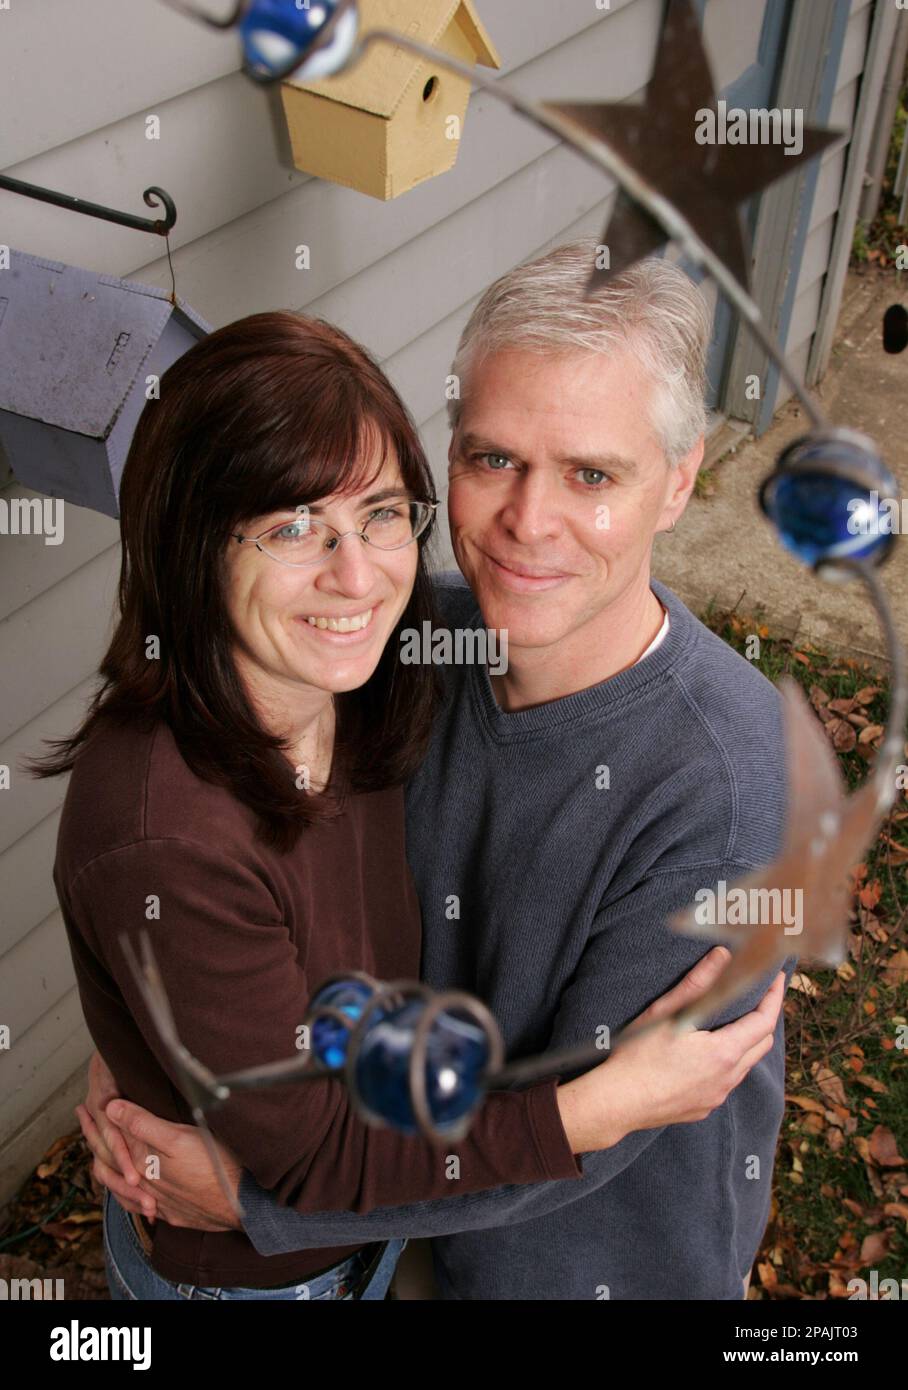 https://c8.alamy.com/comp/2PAJT03/for-use-with-ap-special-edition-bob-and-laura-robertson-boyd-are-seen-at-their-residence-in-columbus-ohio-sunday-nov-18-2007-under-a-copper-sculpture-that-hangs-in-their-garden-that-they-picked-out-together-for-their-seveth-wedding-anniversary-other-items-include-a-paper-box-bob-made-for-the-first-anniversary-a-lilac-bush-for-the-fifth-and-a-piece-of-pottery-for-the-eighth-ap-photopaul-vernon-2PAJT03.jpg